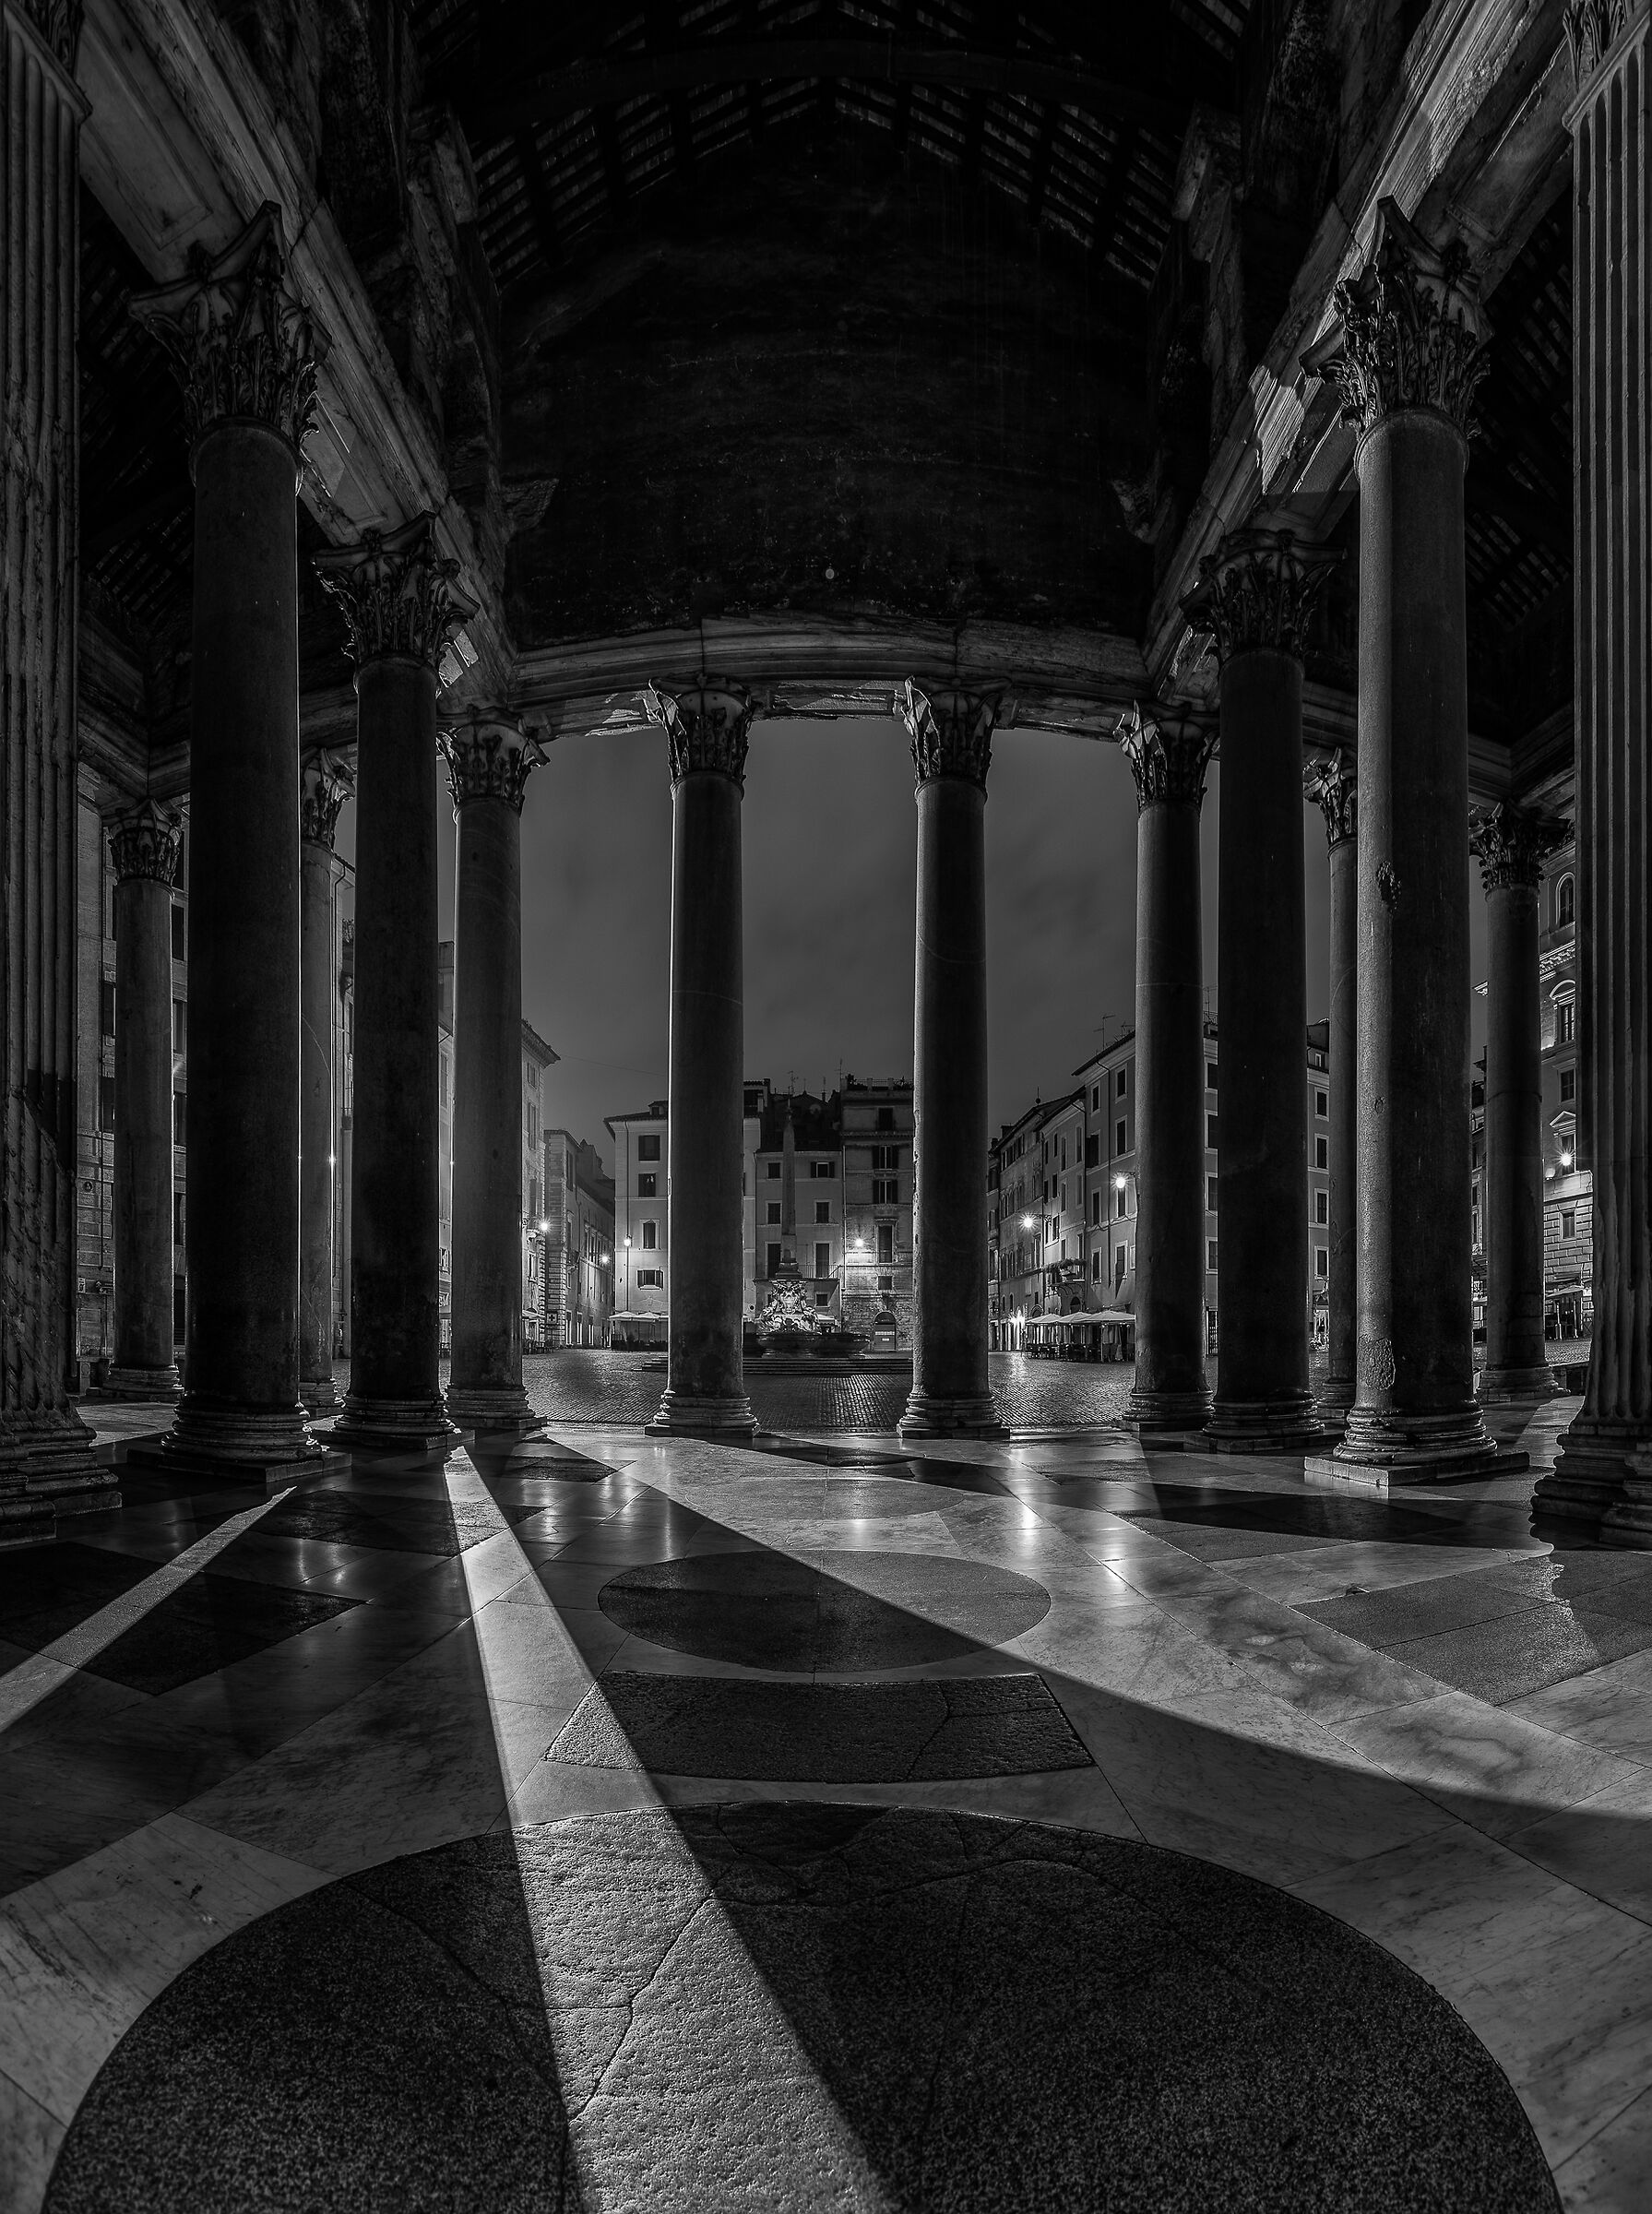 Playing... with lights at the Pantheon...